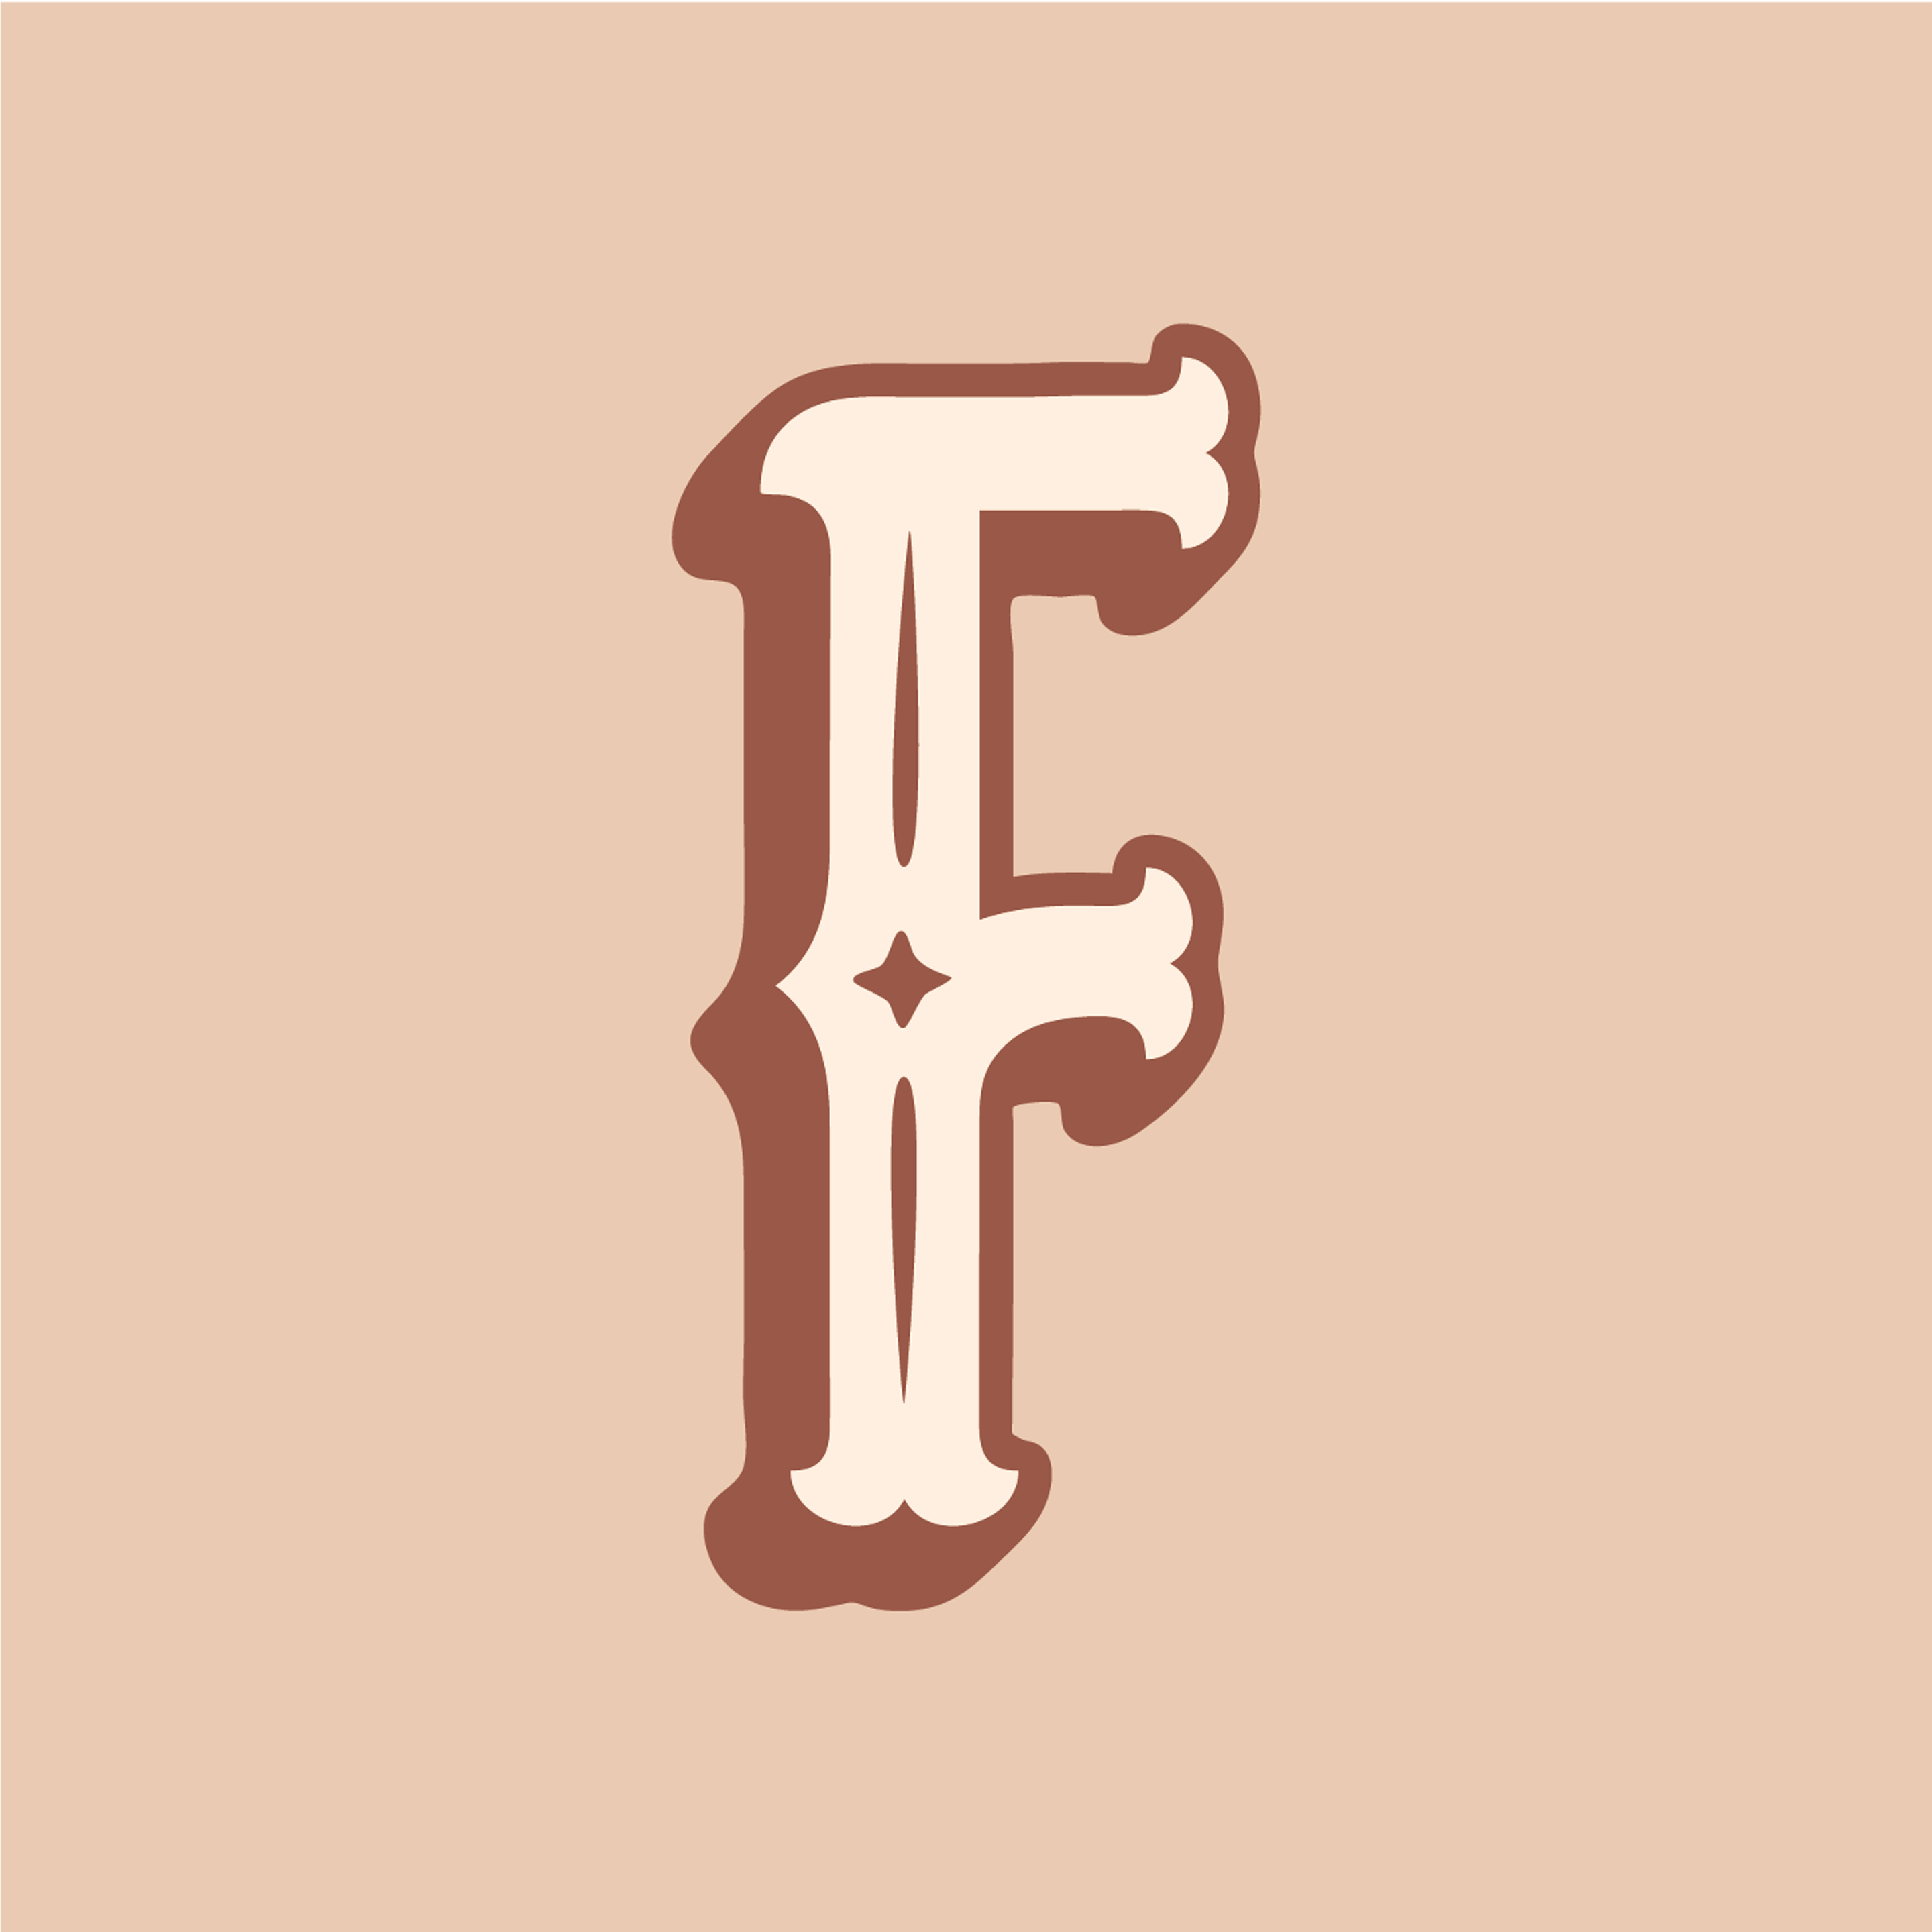 western-style-letter-f-design-theme